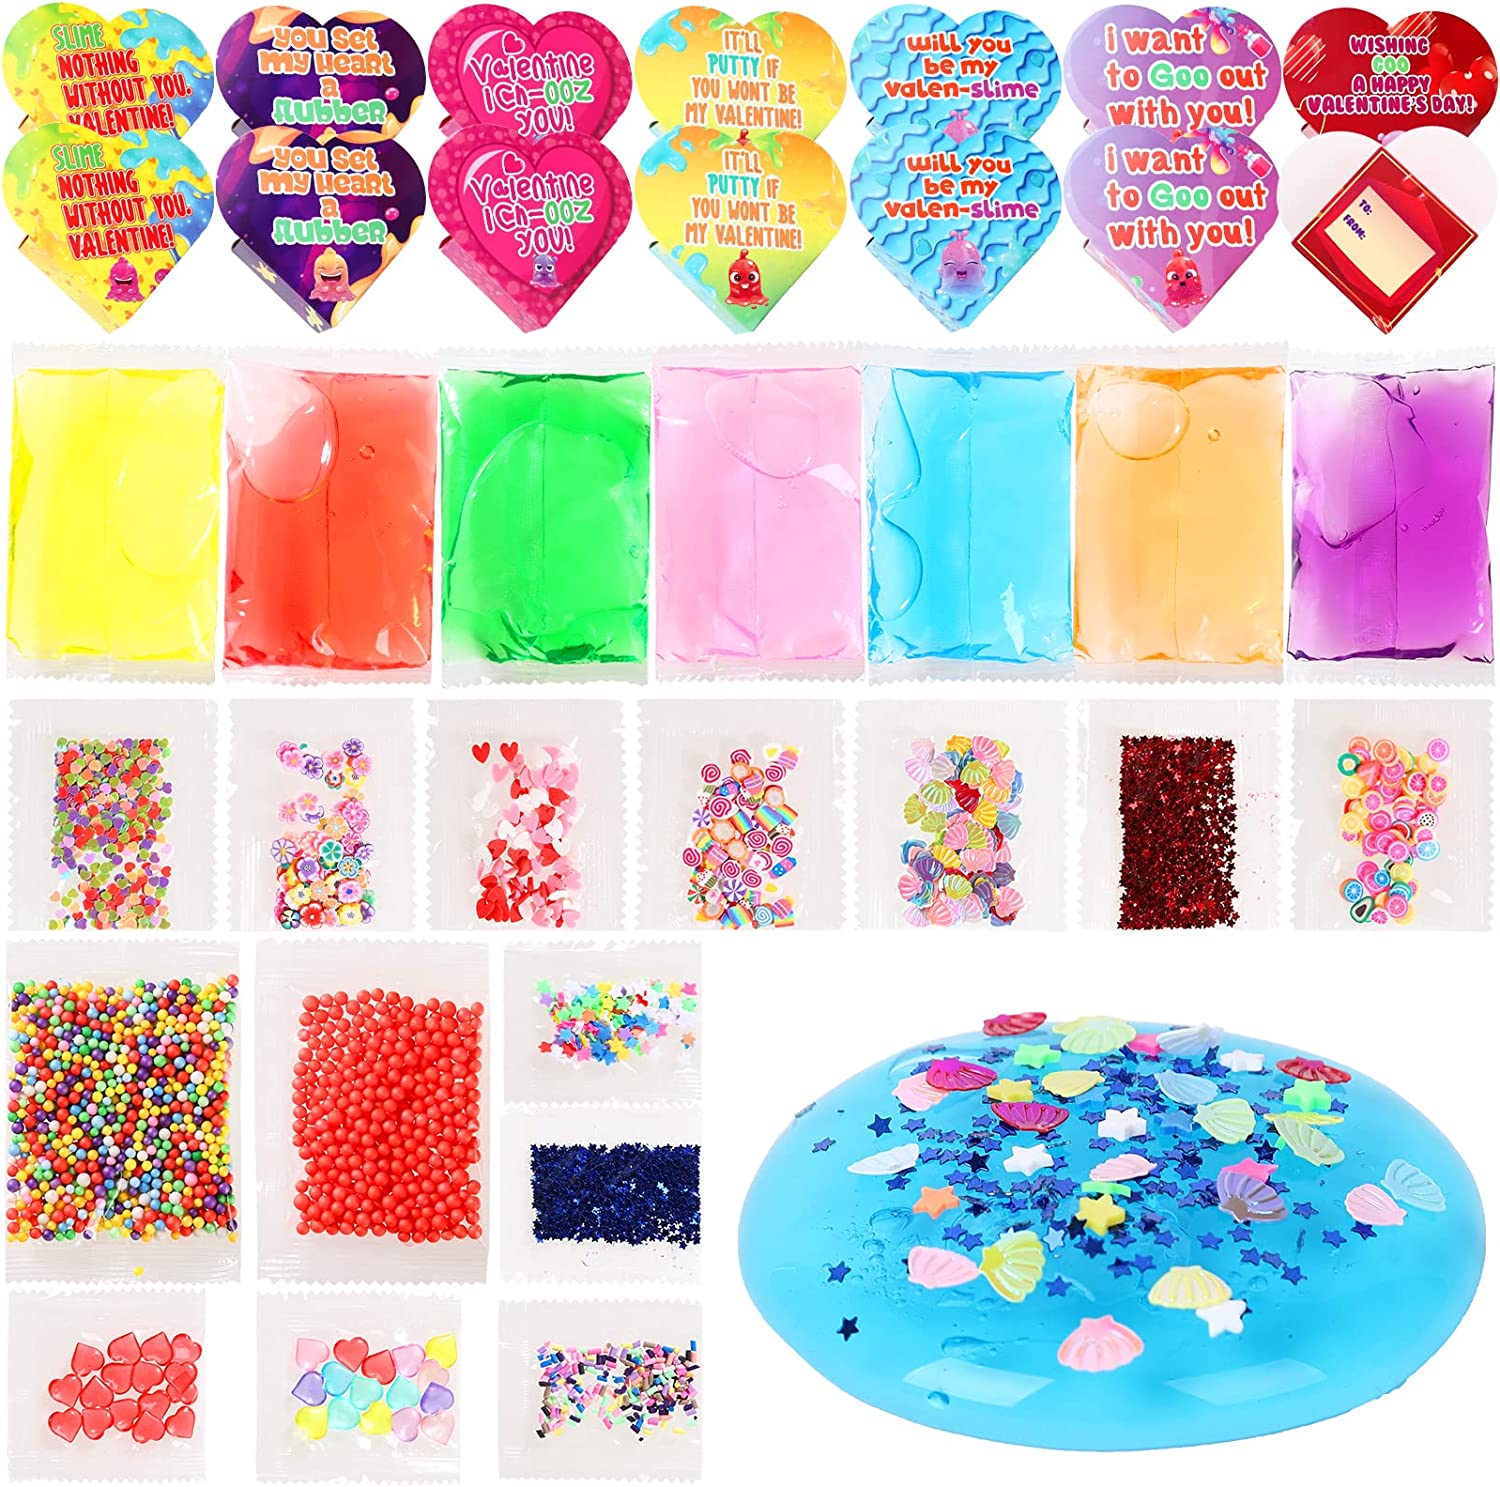 28 Packs Valentine's Day DIY Slime Kit with Heart Boxes, Slime